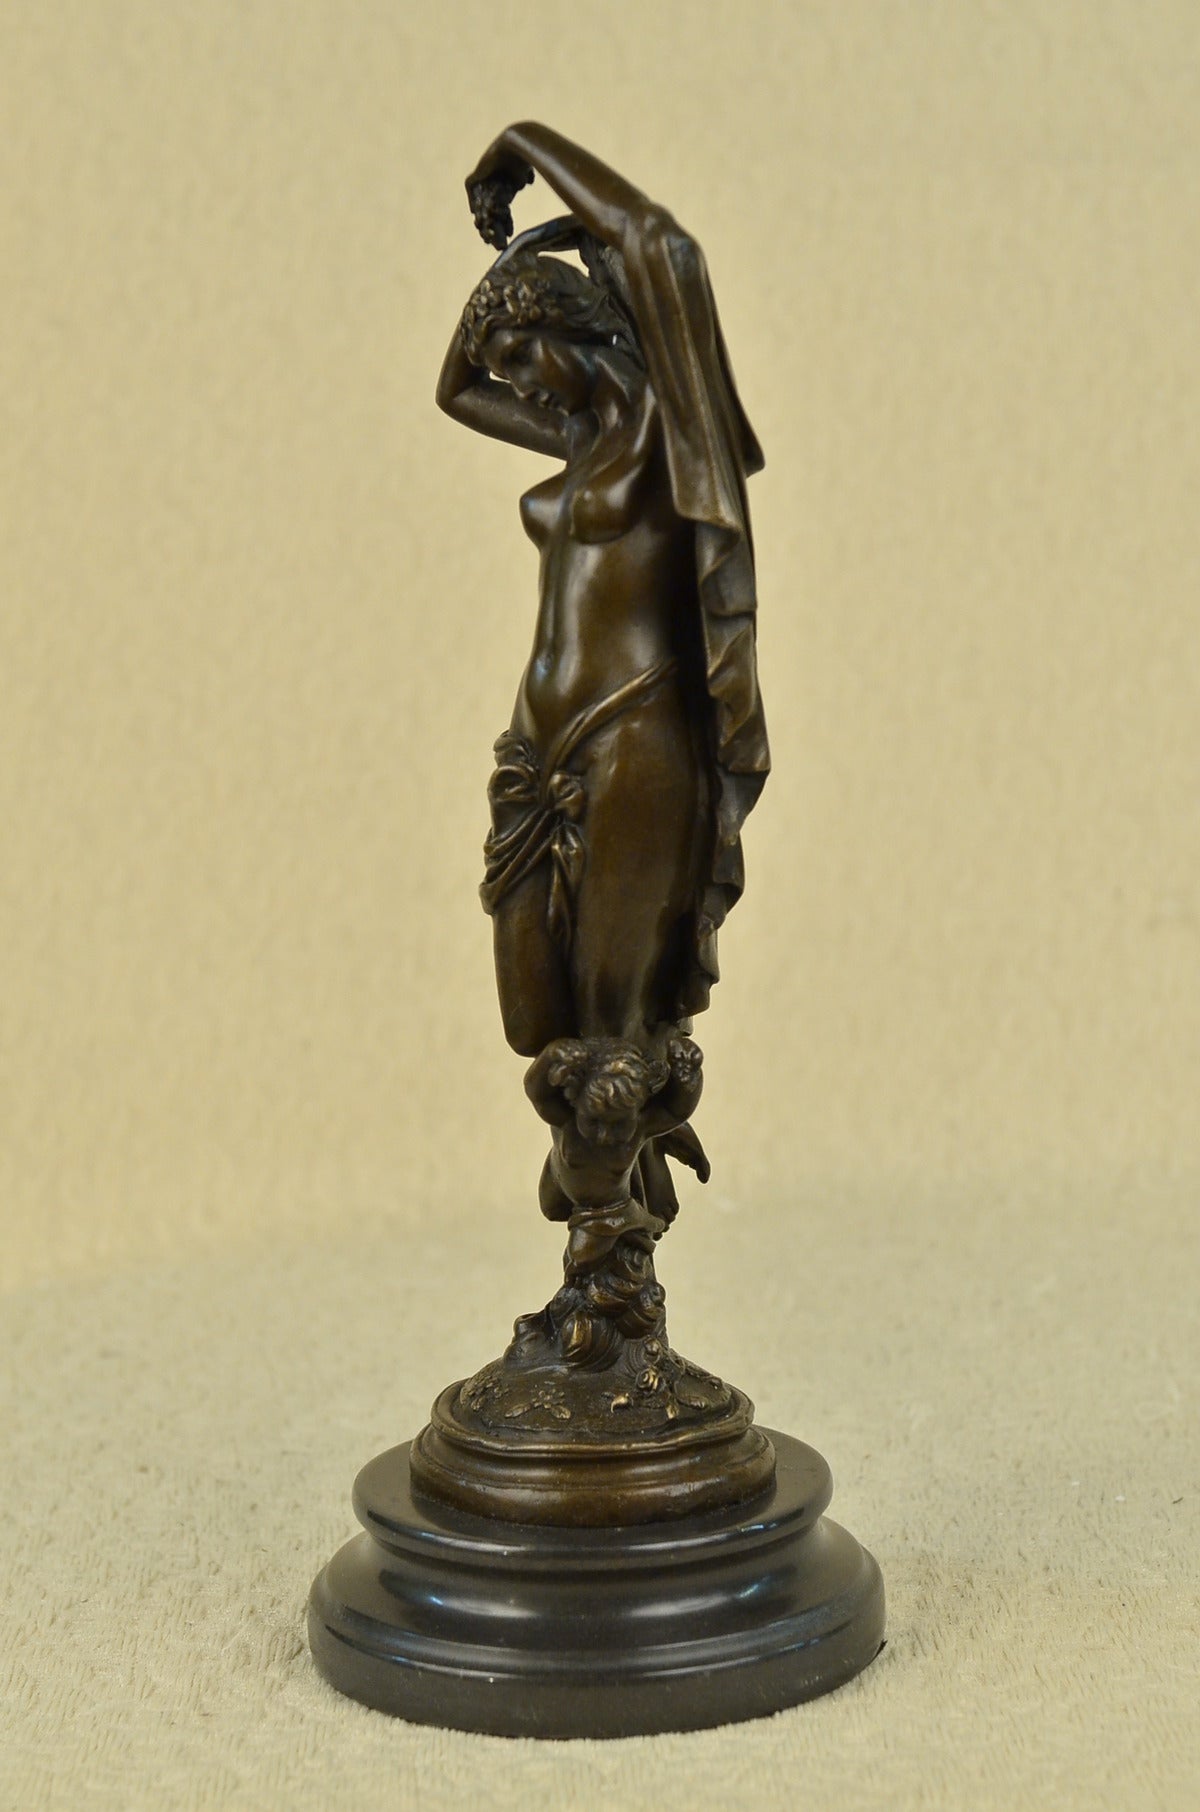 SIGNED MOREAU NUDE LADY WITH ANGEL BRONZE STATUE ART DECO HOT CAST MARBLE FIGURE